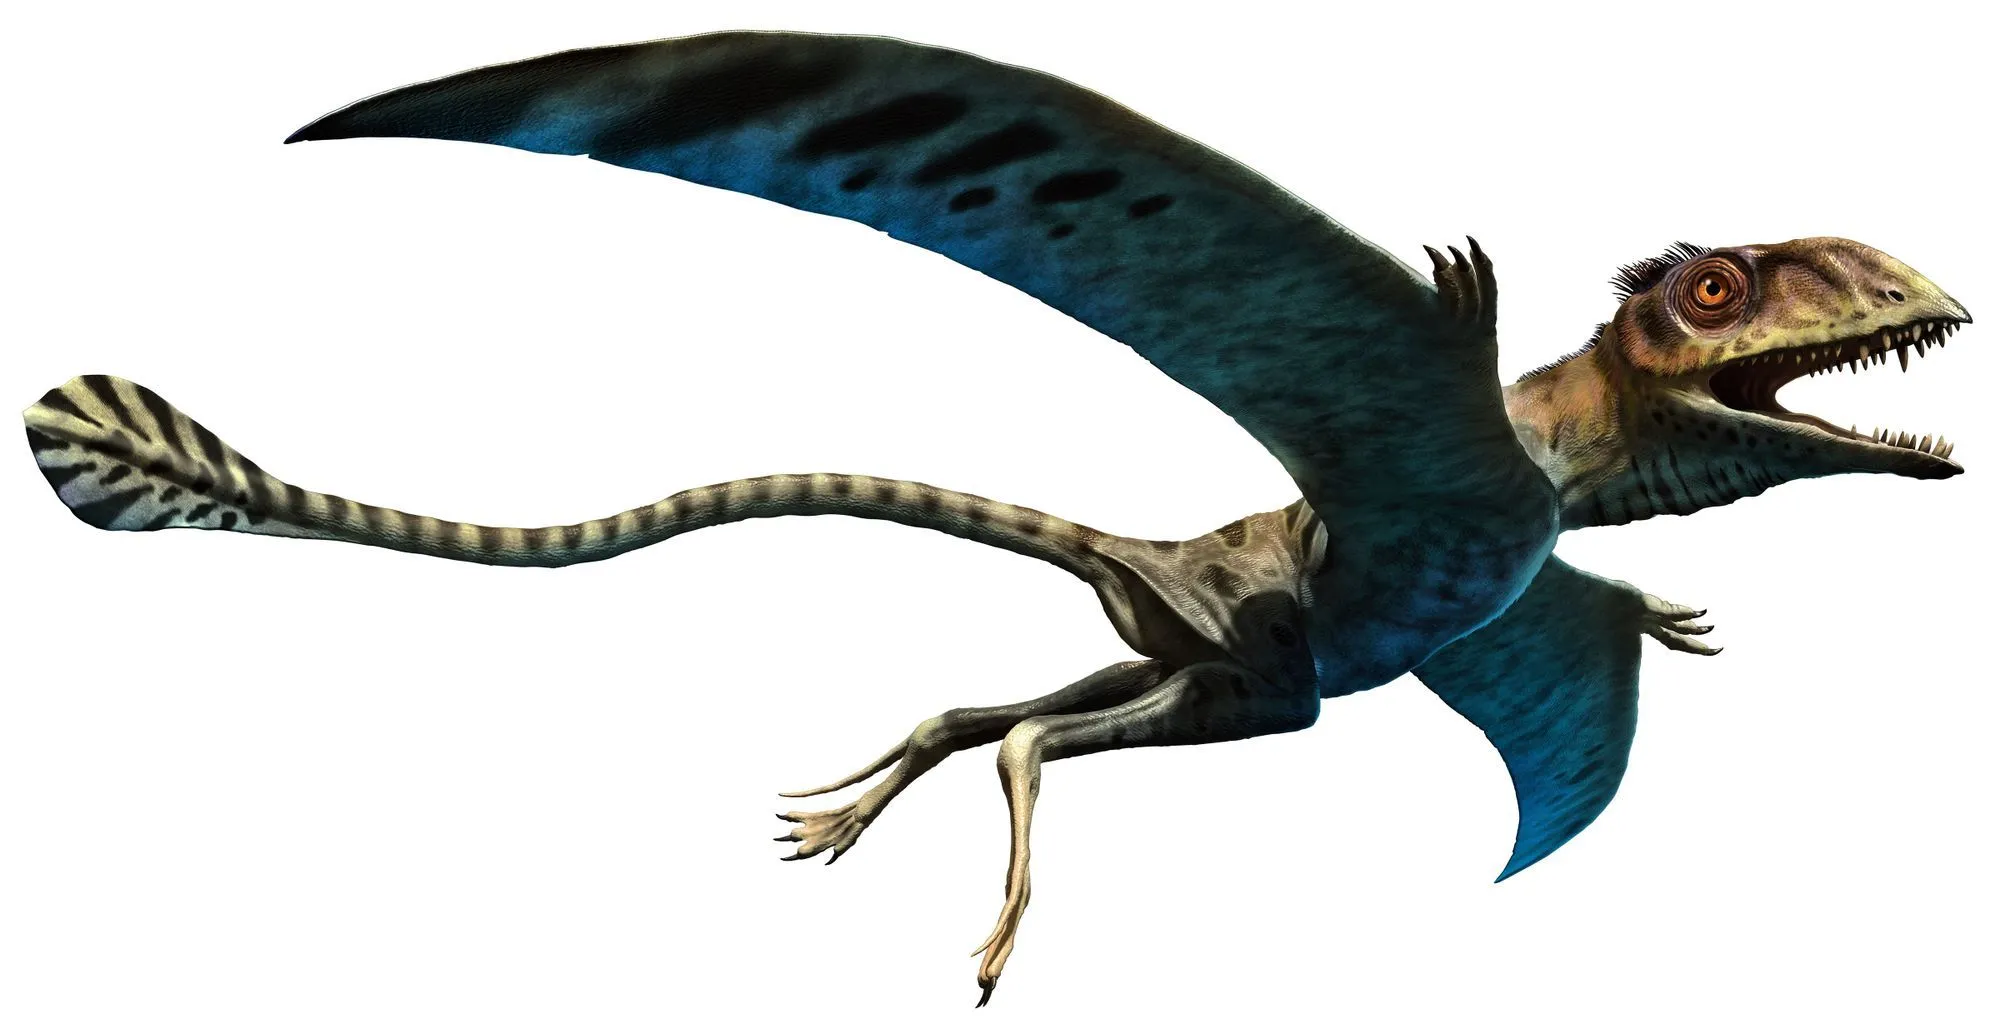 One interesting Peteinosaurus fact is that this was a winged species found in Italy